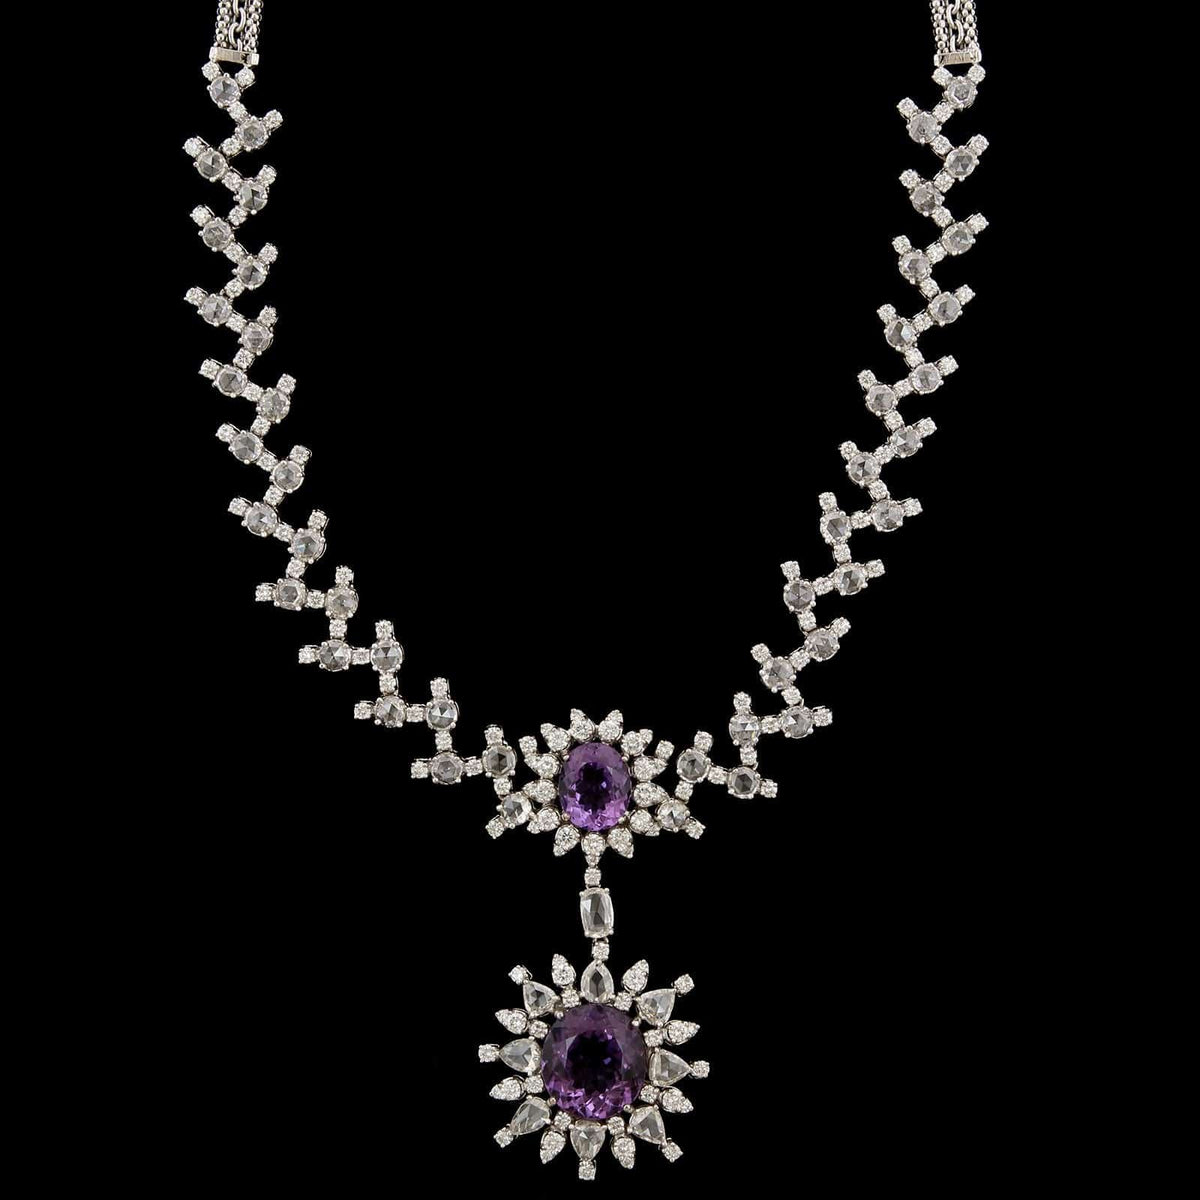 18K White Gold Estate Amethyst and Diamond Necklace